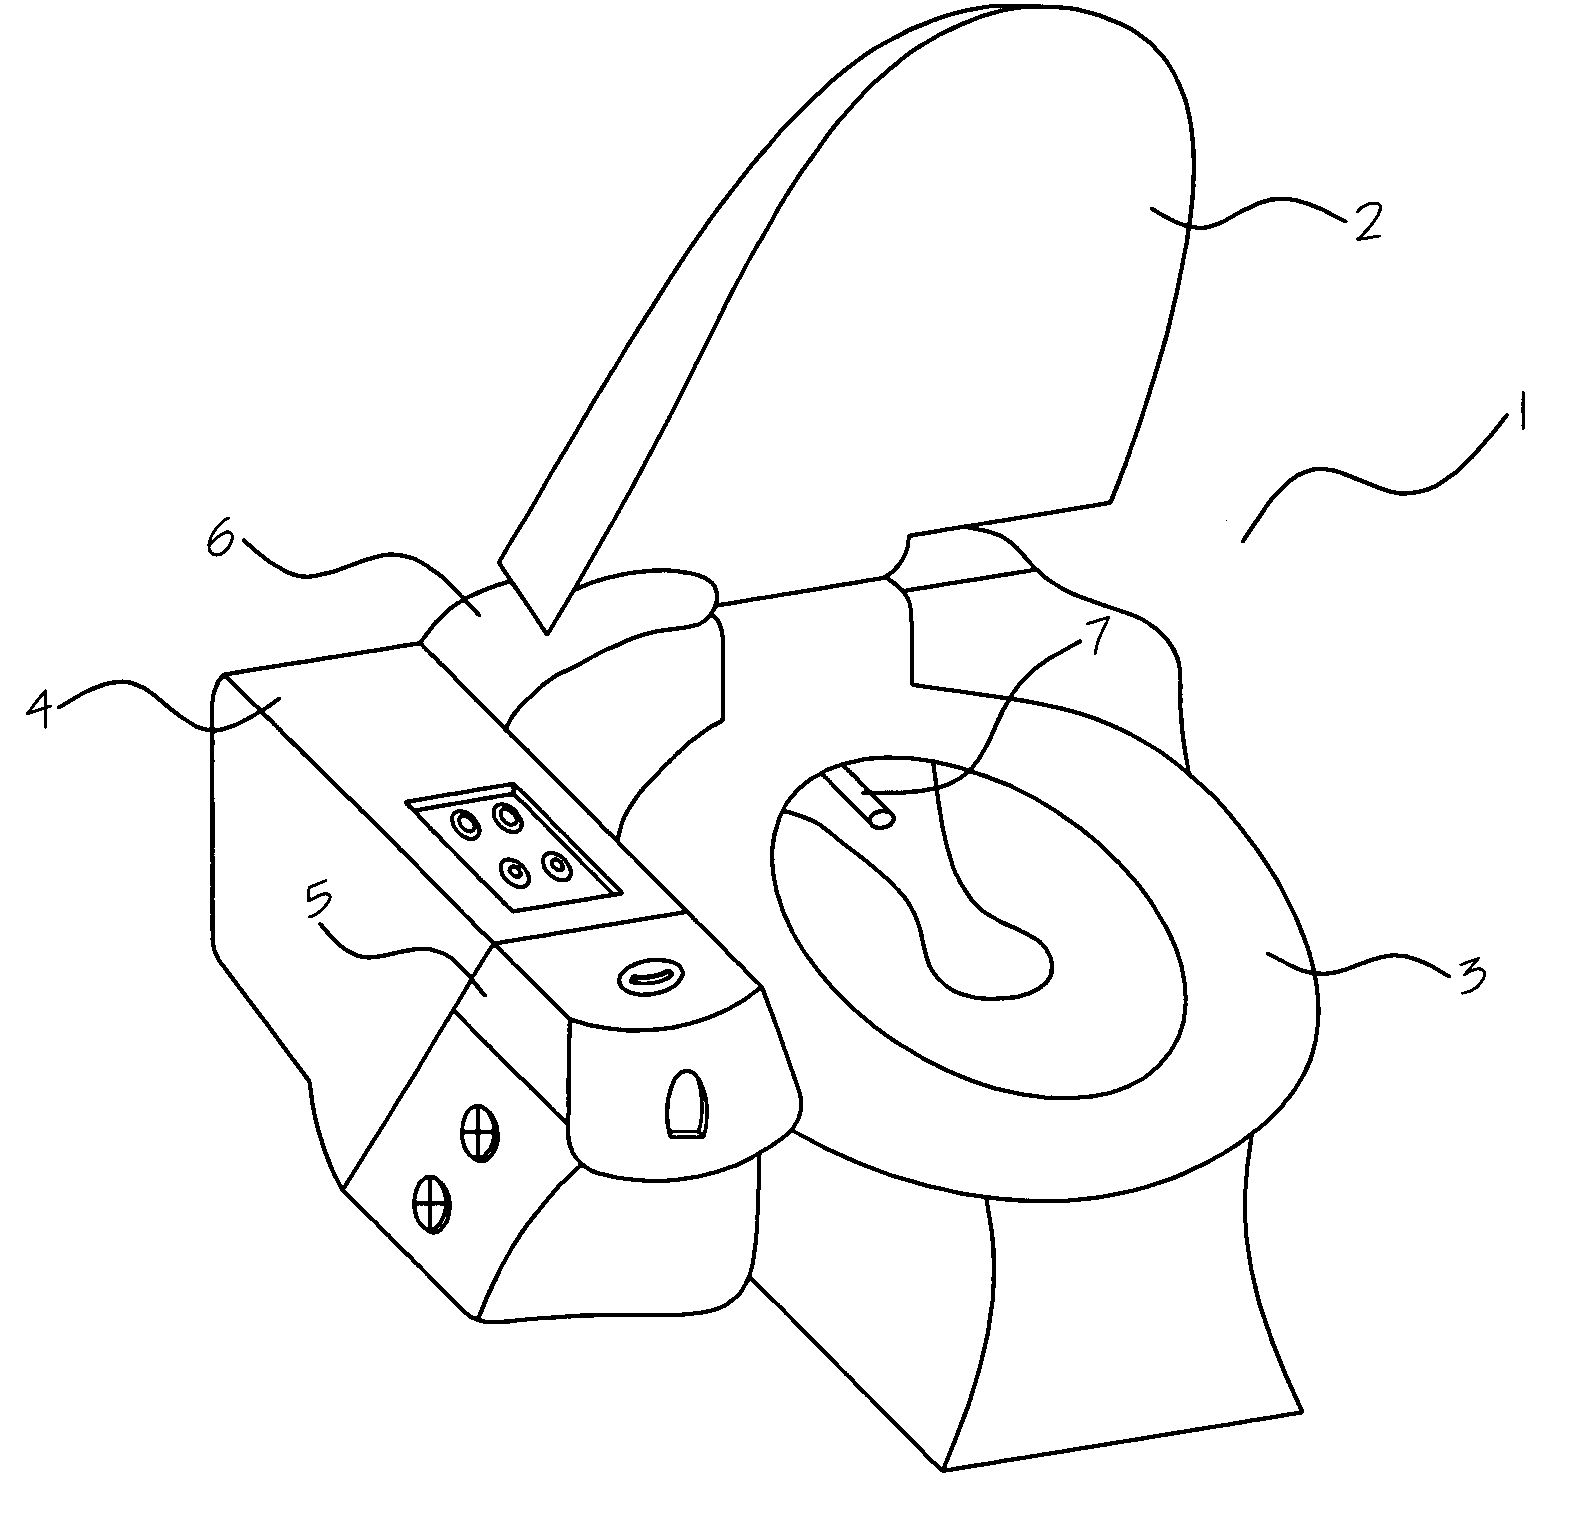 Coin operating bidet response to user's selection